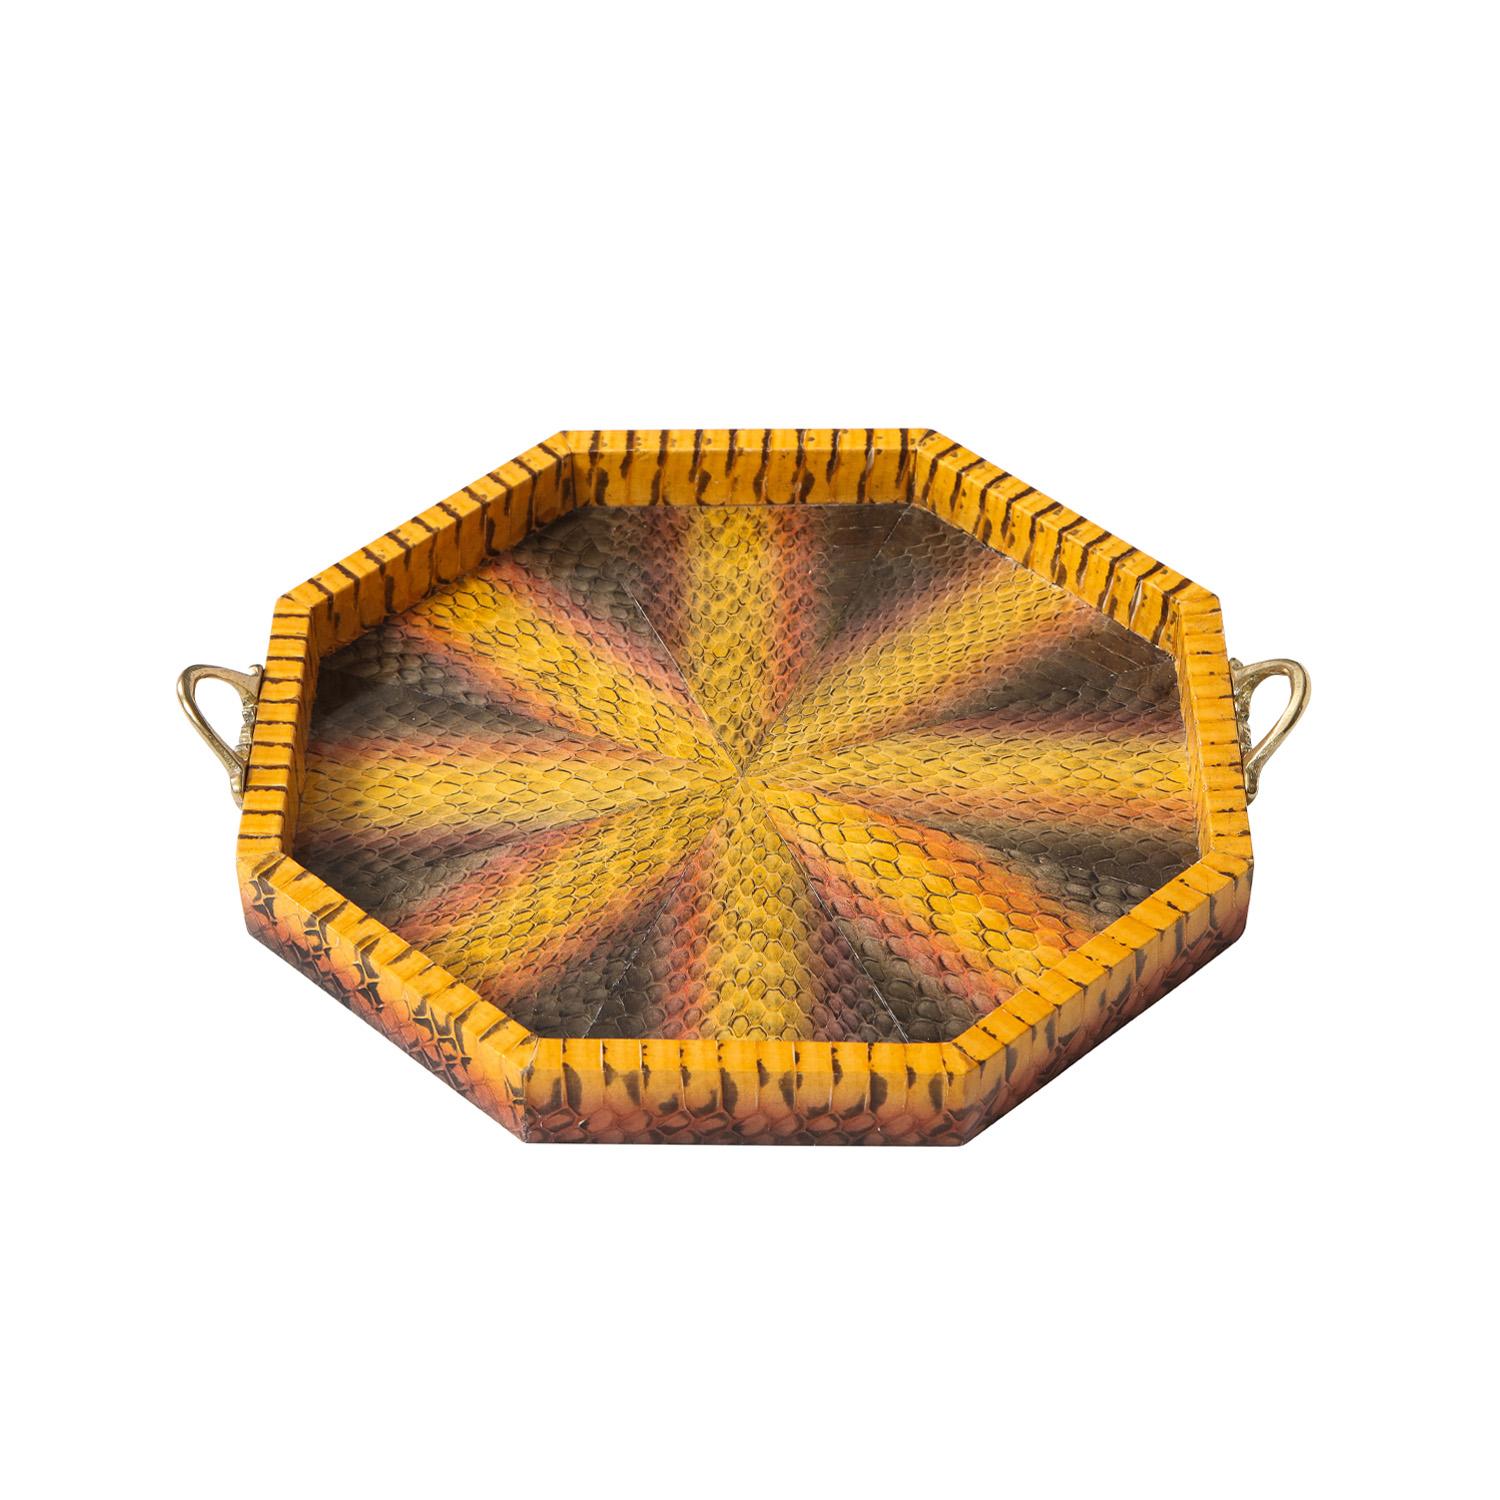 8 Sided tray covered in plum, gray and sunflower python with radiating design, brass handles and bottom covered in black moiré silk by Lobel Originals, American. This is beautifully made and part of a small number of unique accessories we have